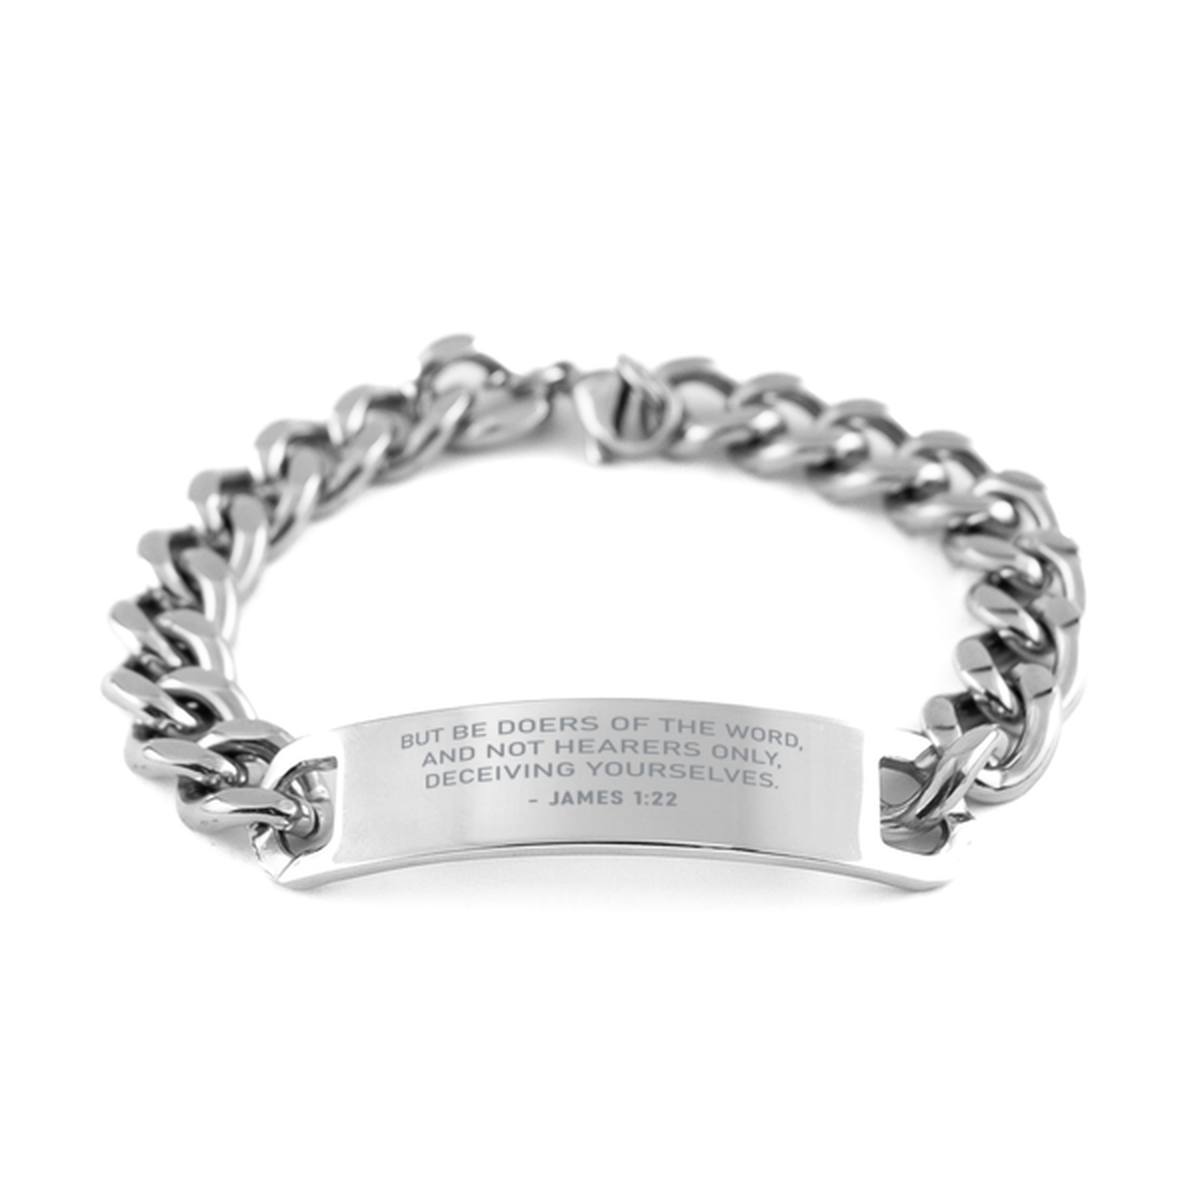 Bible Verse Chain Stainless Steel Bracelet, James 1:22 But Be Doers Of The Word, And Not Hearers Only, Inspirational Christian Gifts For Men Women